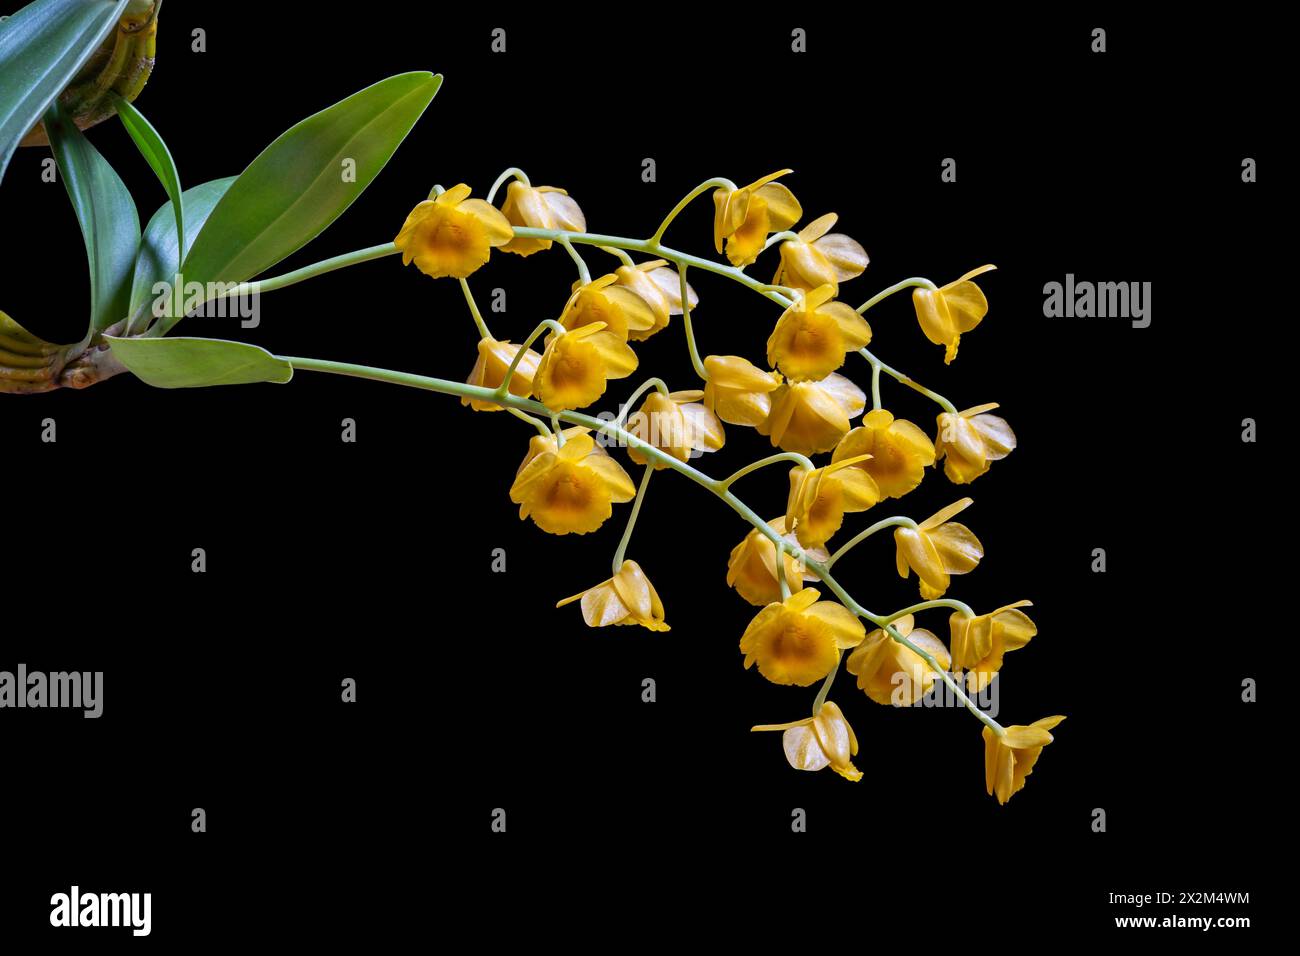 Closeup view of epiphytic orchid species dendrobium chrysotoxum blooming with bright yellow orange cluster of flowers isolated on black background Stock Photo